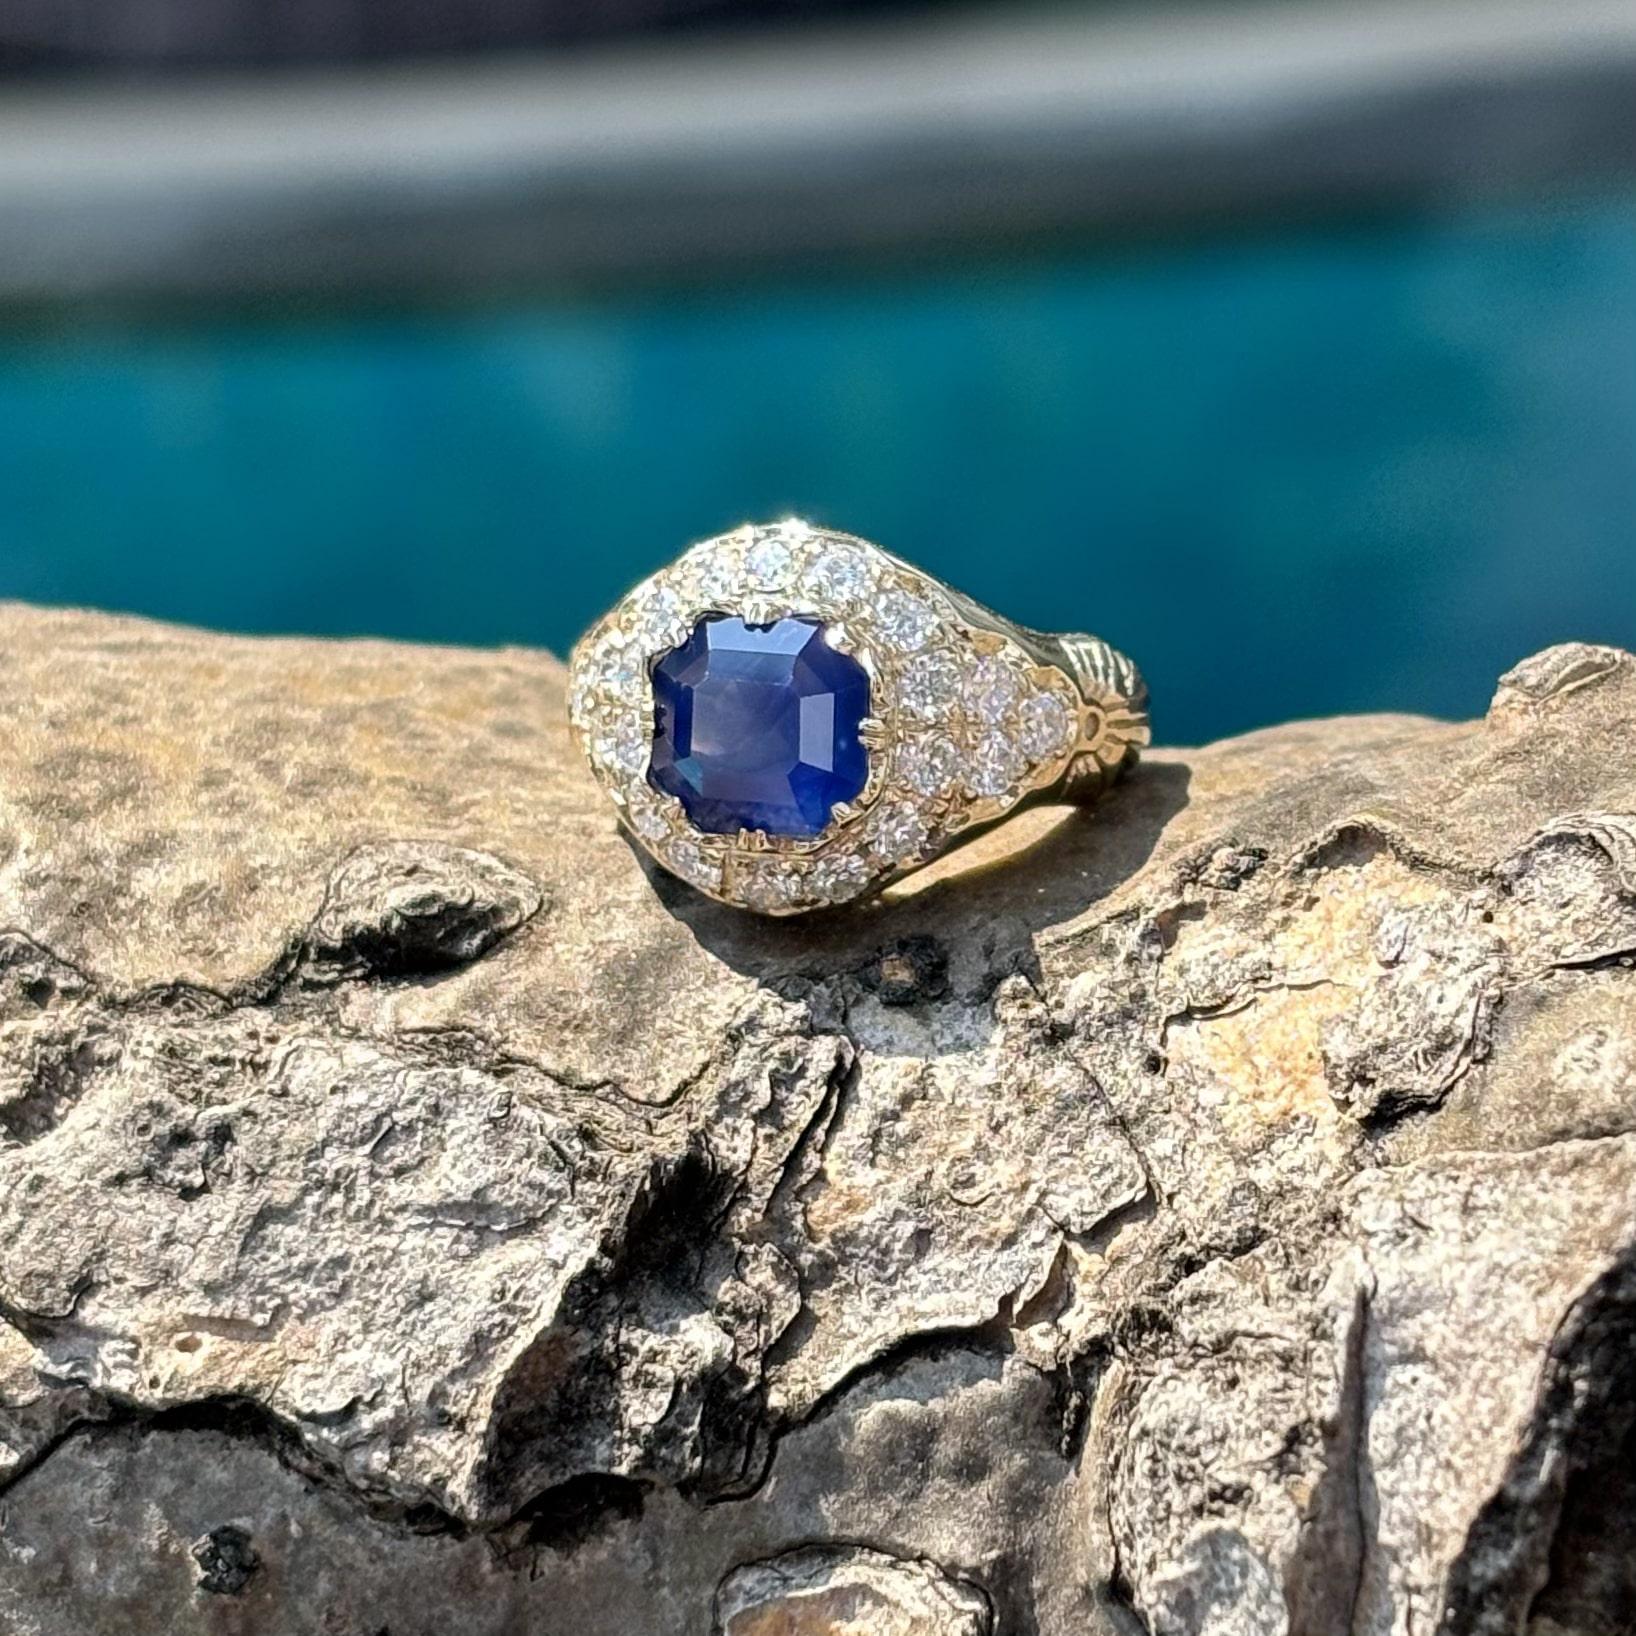 Victorian   2.64 Carat Royal Blue Sapphire Ring with Old Mine Cut Diamonds in 18K Gold